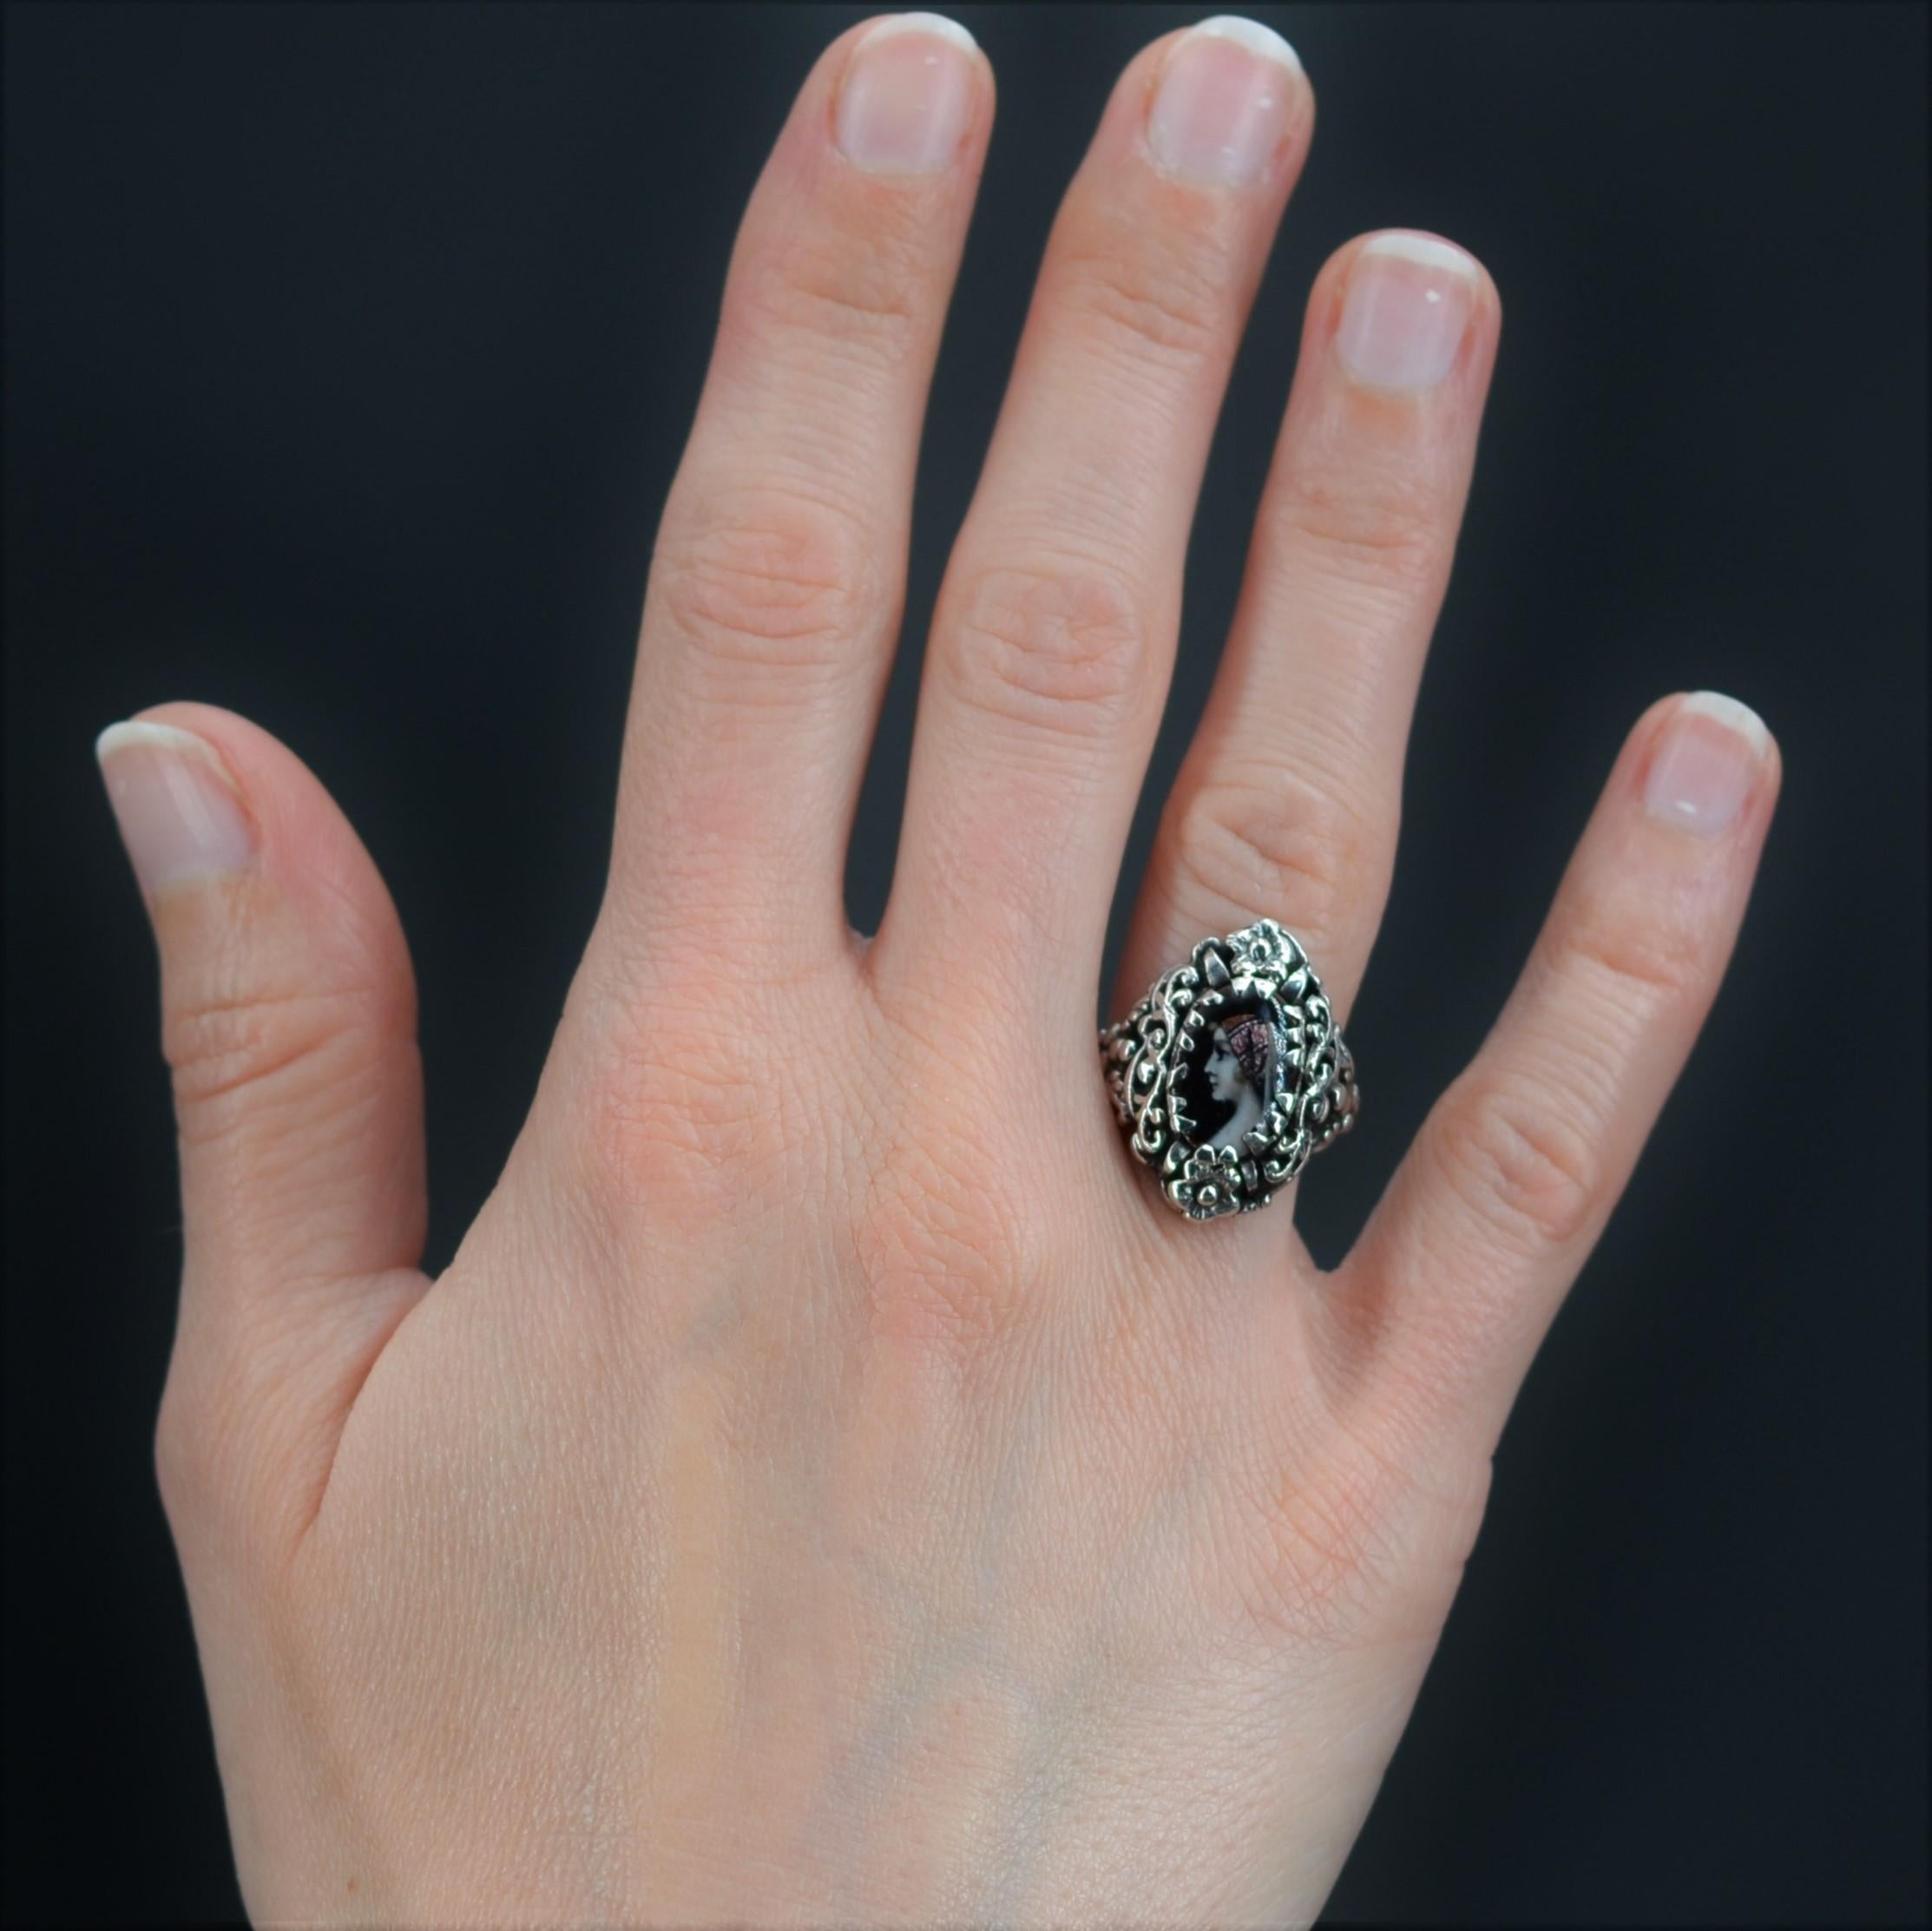 Ring in silver.
Lovely and rare antique ring, it is decorated by a silver pattern, openworked with flowers and arabesques, of a Limoges enamel representing a young woman in profile wearing a veil.
Height : 22.7 mm approximately, width : 16.7 mm